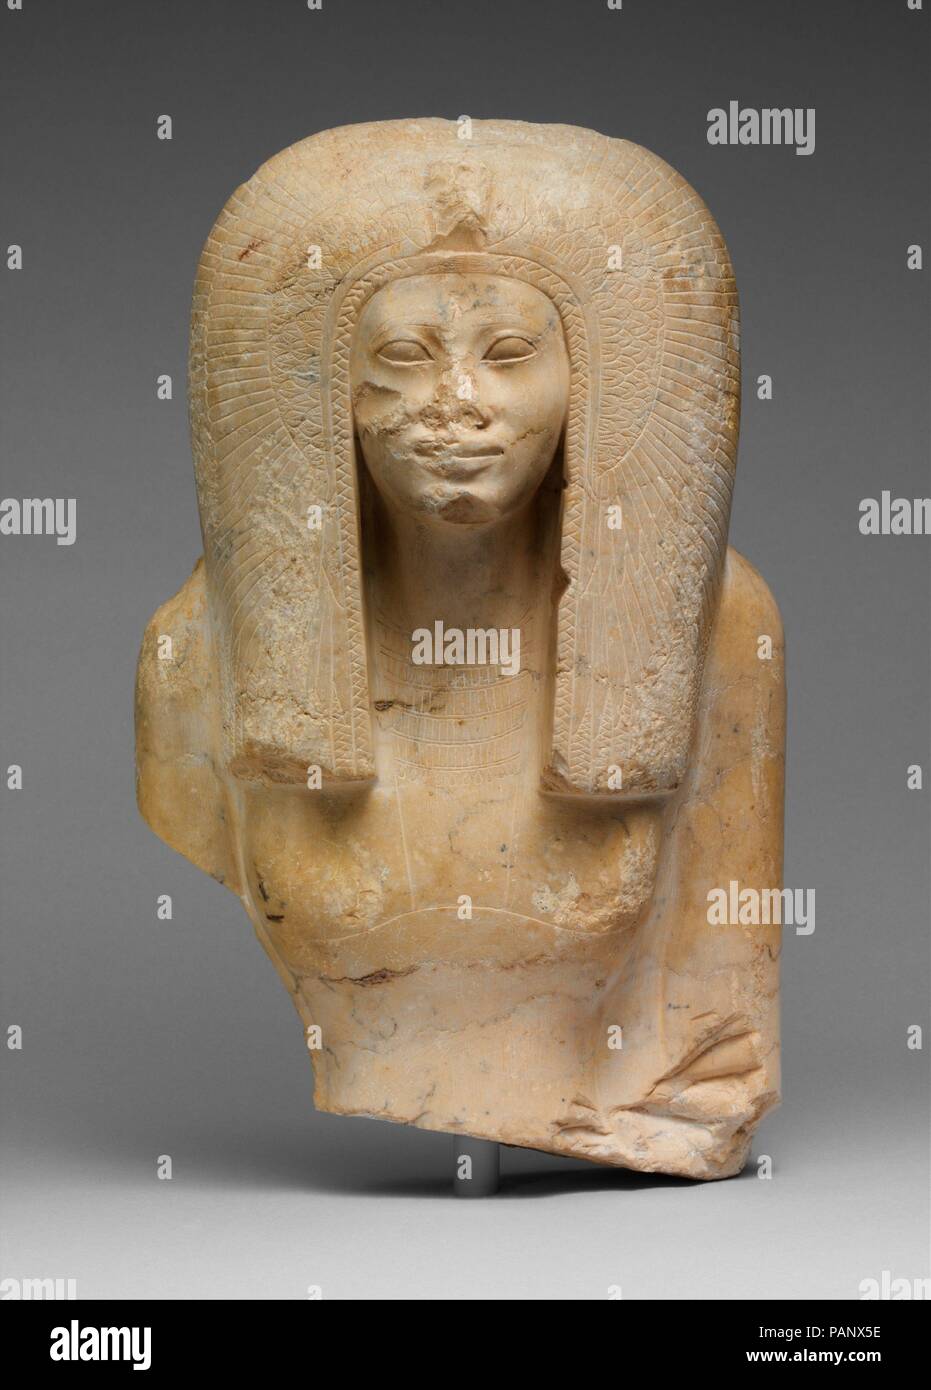 Upper Part of the Seated Statue of a Queen. Dimensions: H. 28 cm (11 in.); W. 17.8 cm (7 in.); D. 10 cm (3 15/16 in.). Dynasty: Late Dynasty 17-Early Dynasty 18. Date: ca. 1580-1550 B.C..  This image of a queen wearing the vulture headdress over a voluminous tripartite wig was split off its backslab in antiquity, most probably by somebody who wanted to make use of this conveniently shaped piece of stone for other purposes. It is conceivable that a king (her father, son, or husband) was originally represented seated beside her. The sculpture has been identified tentatively as Queen Ahmes Nefert Stock Photo